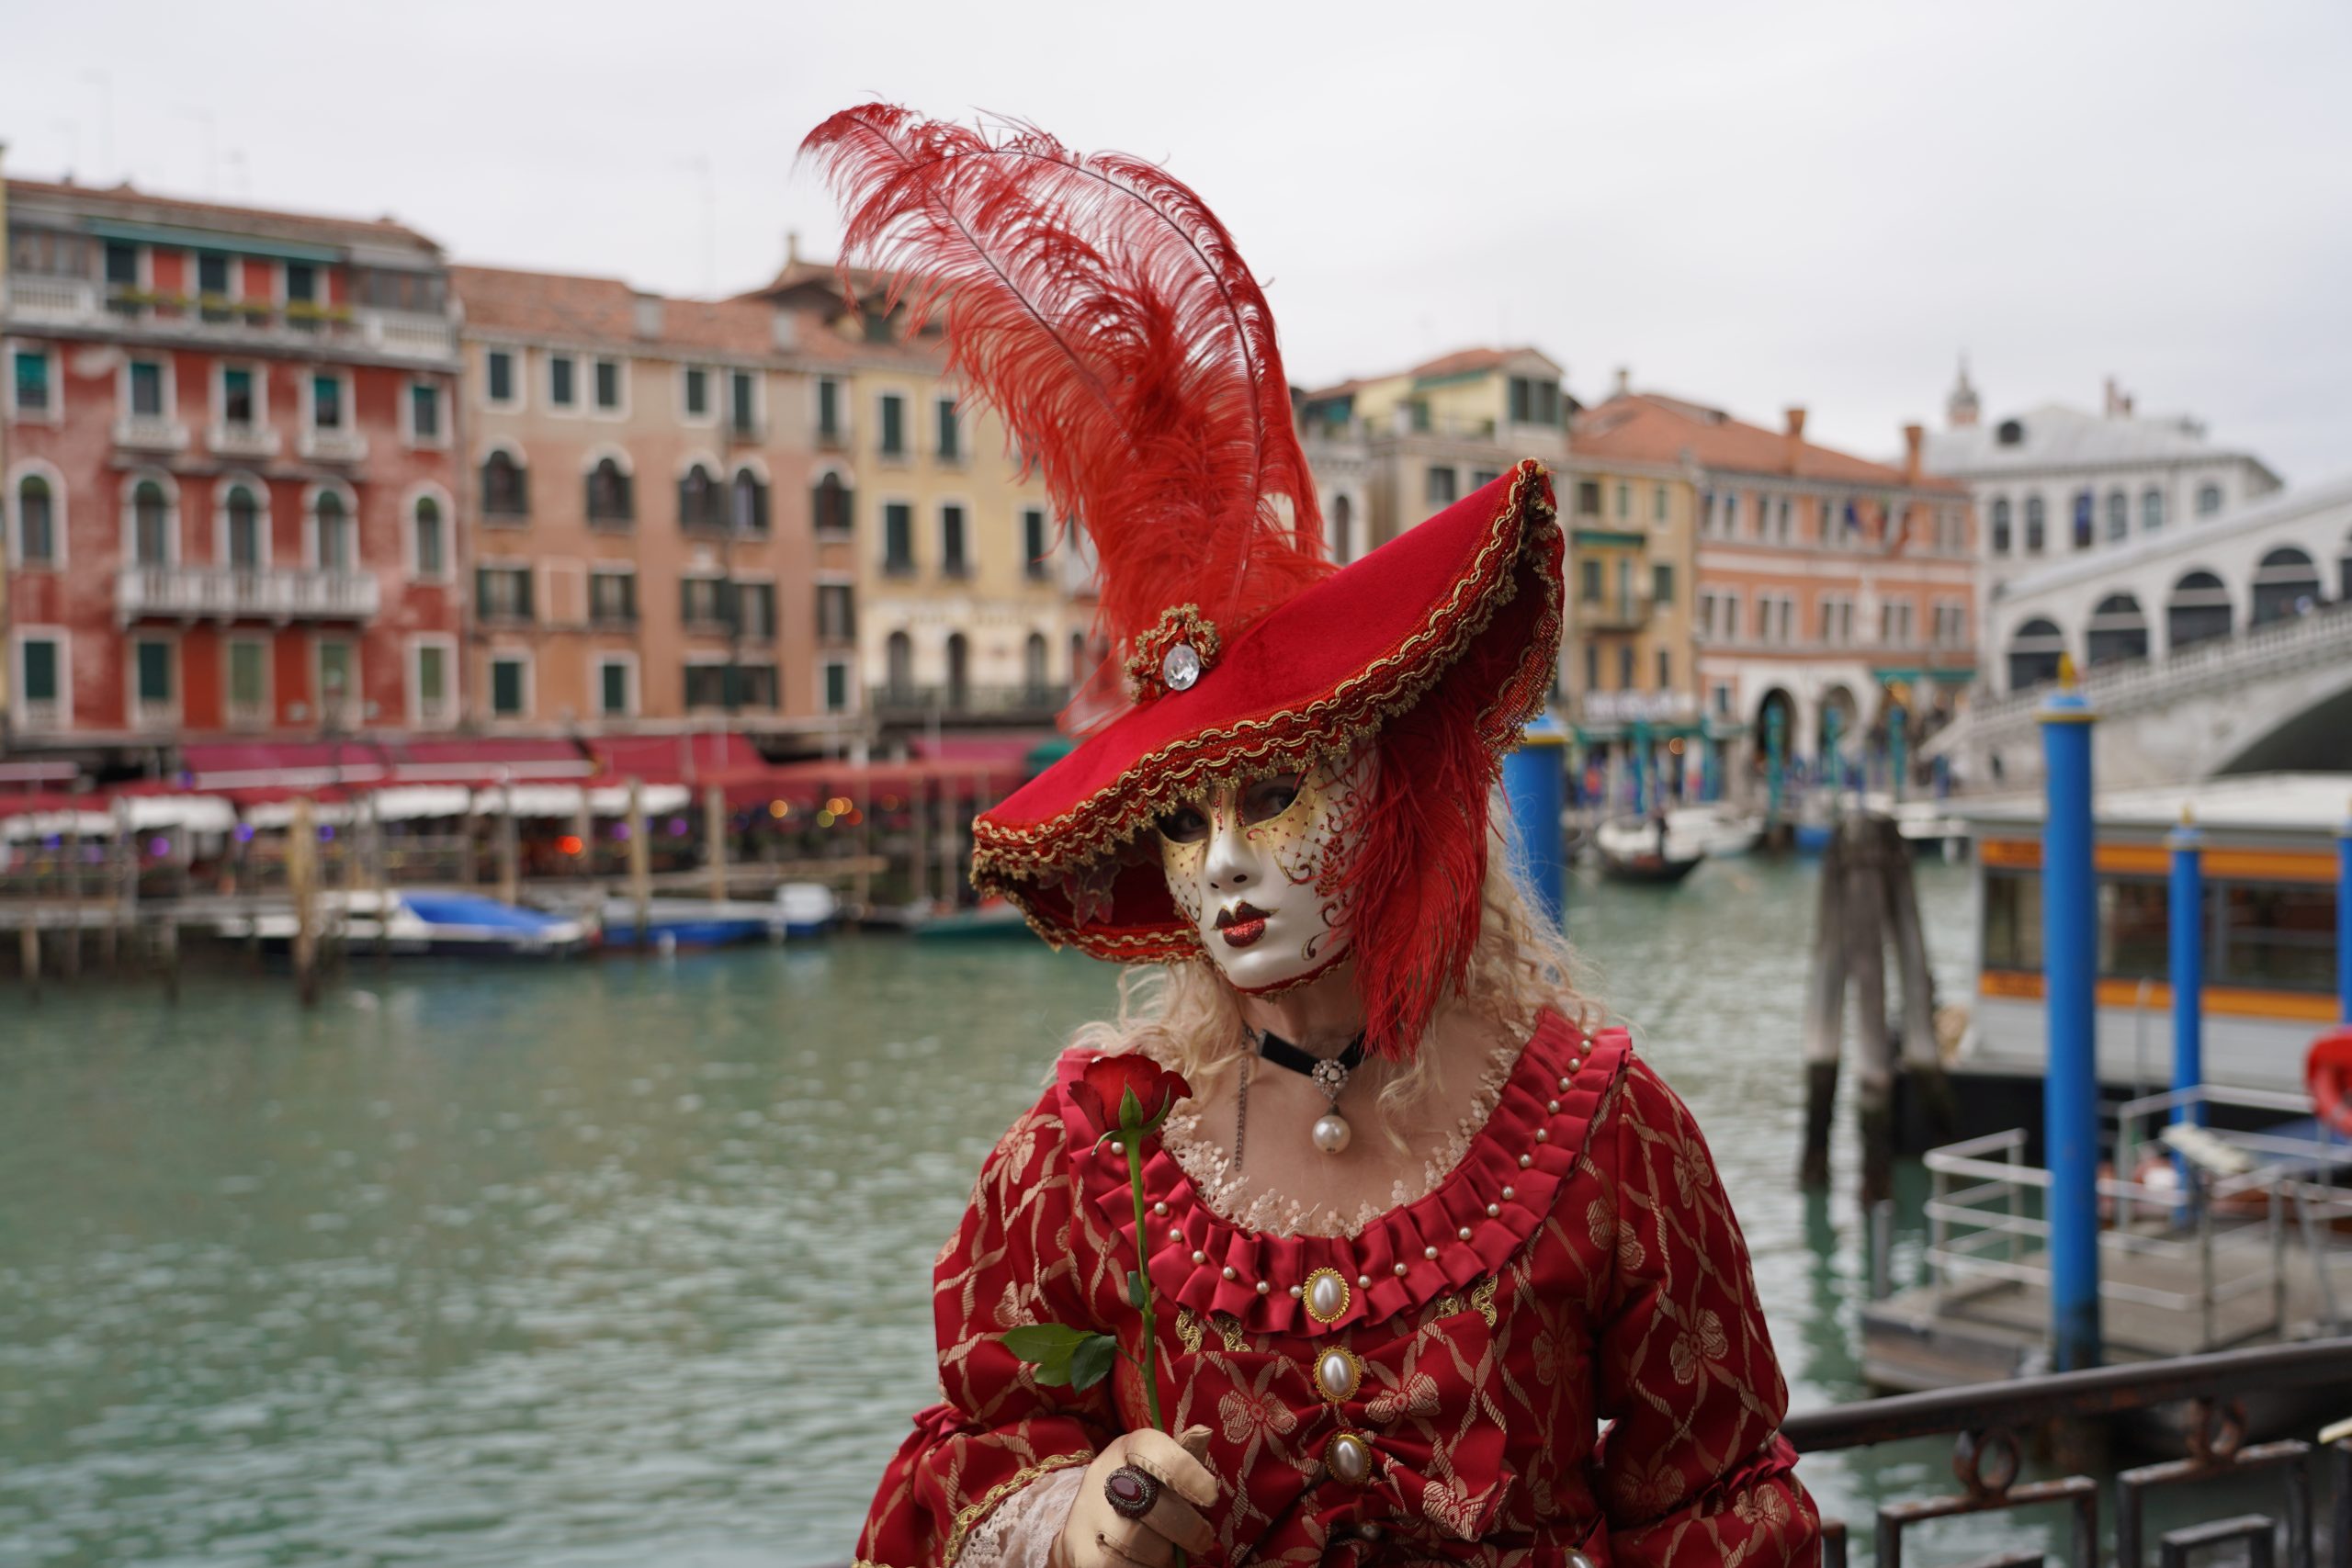 The Carnival of Venice features Venetian looks from the past.